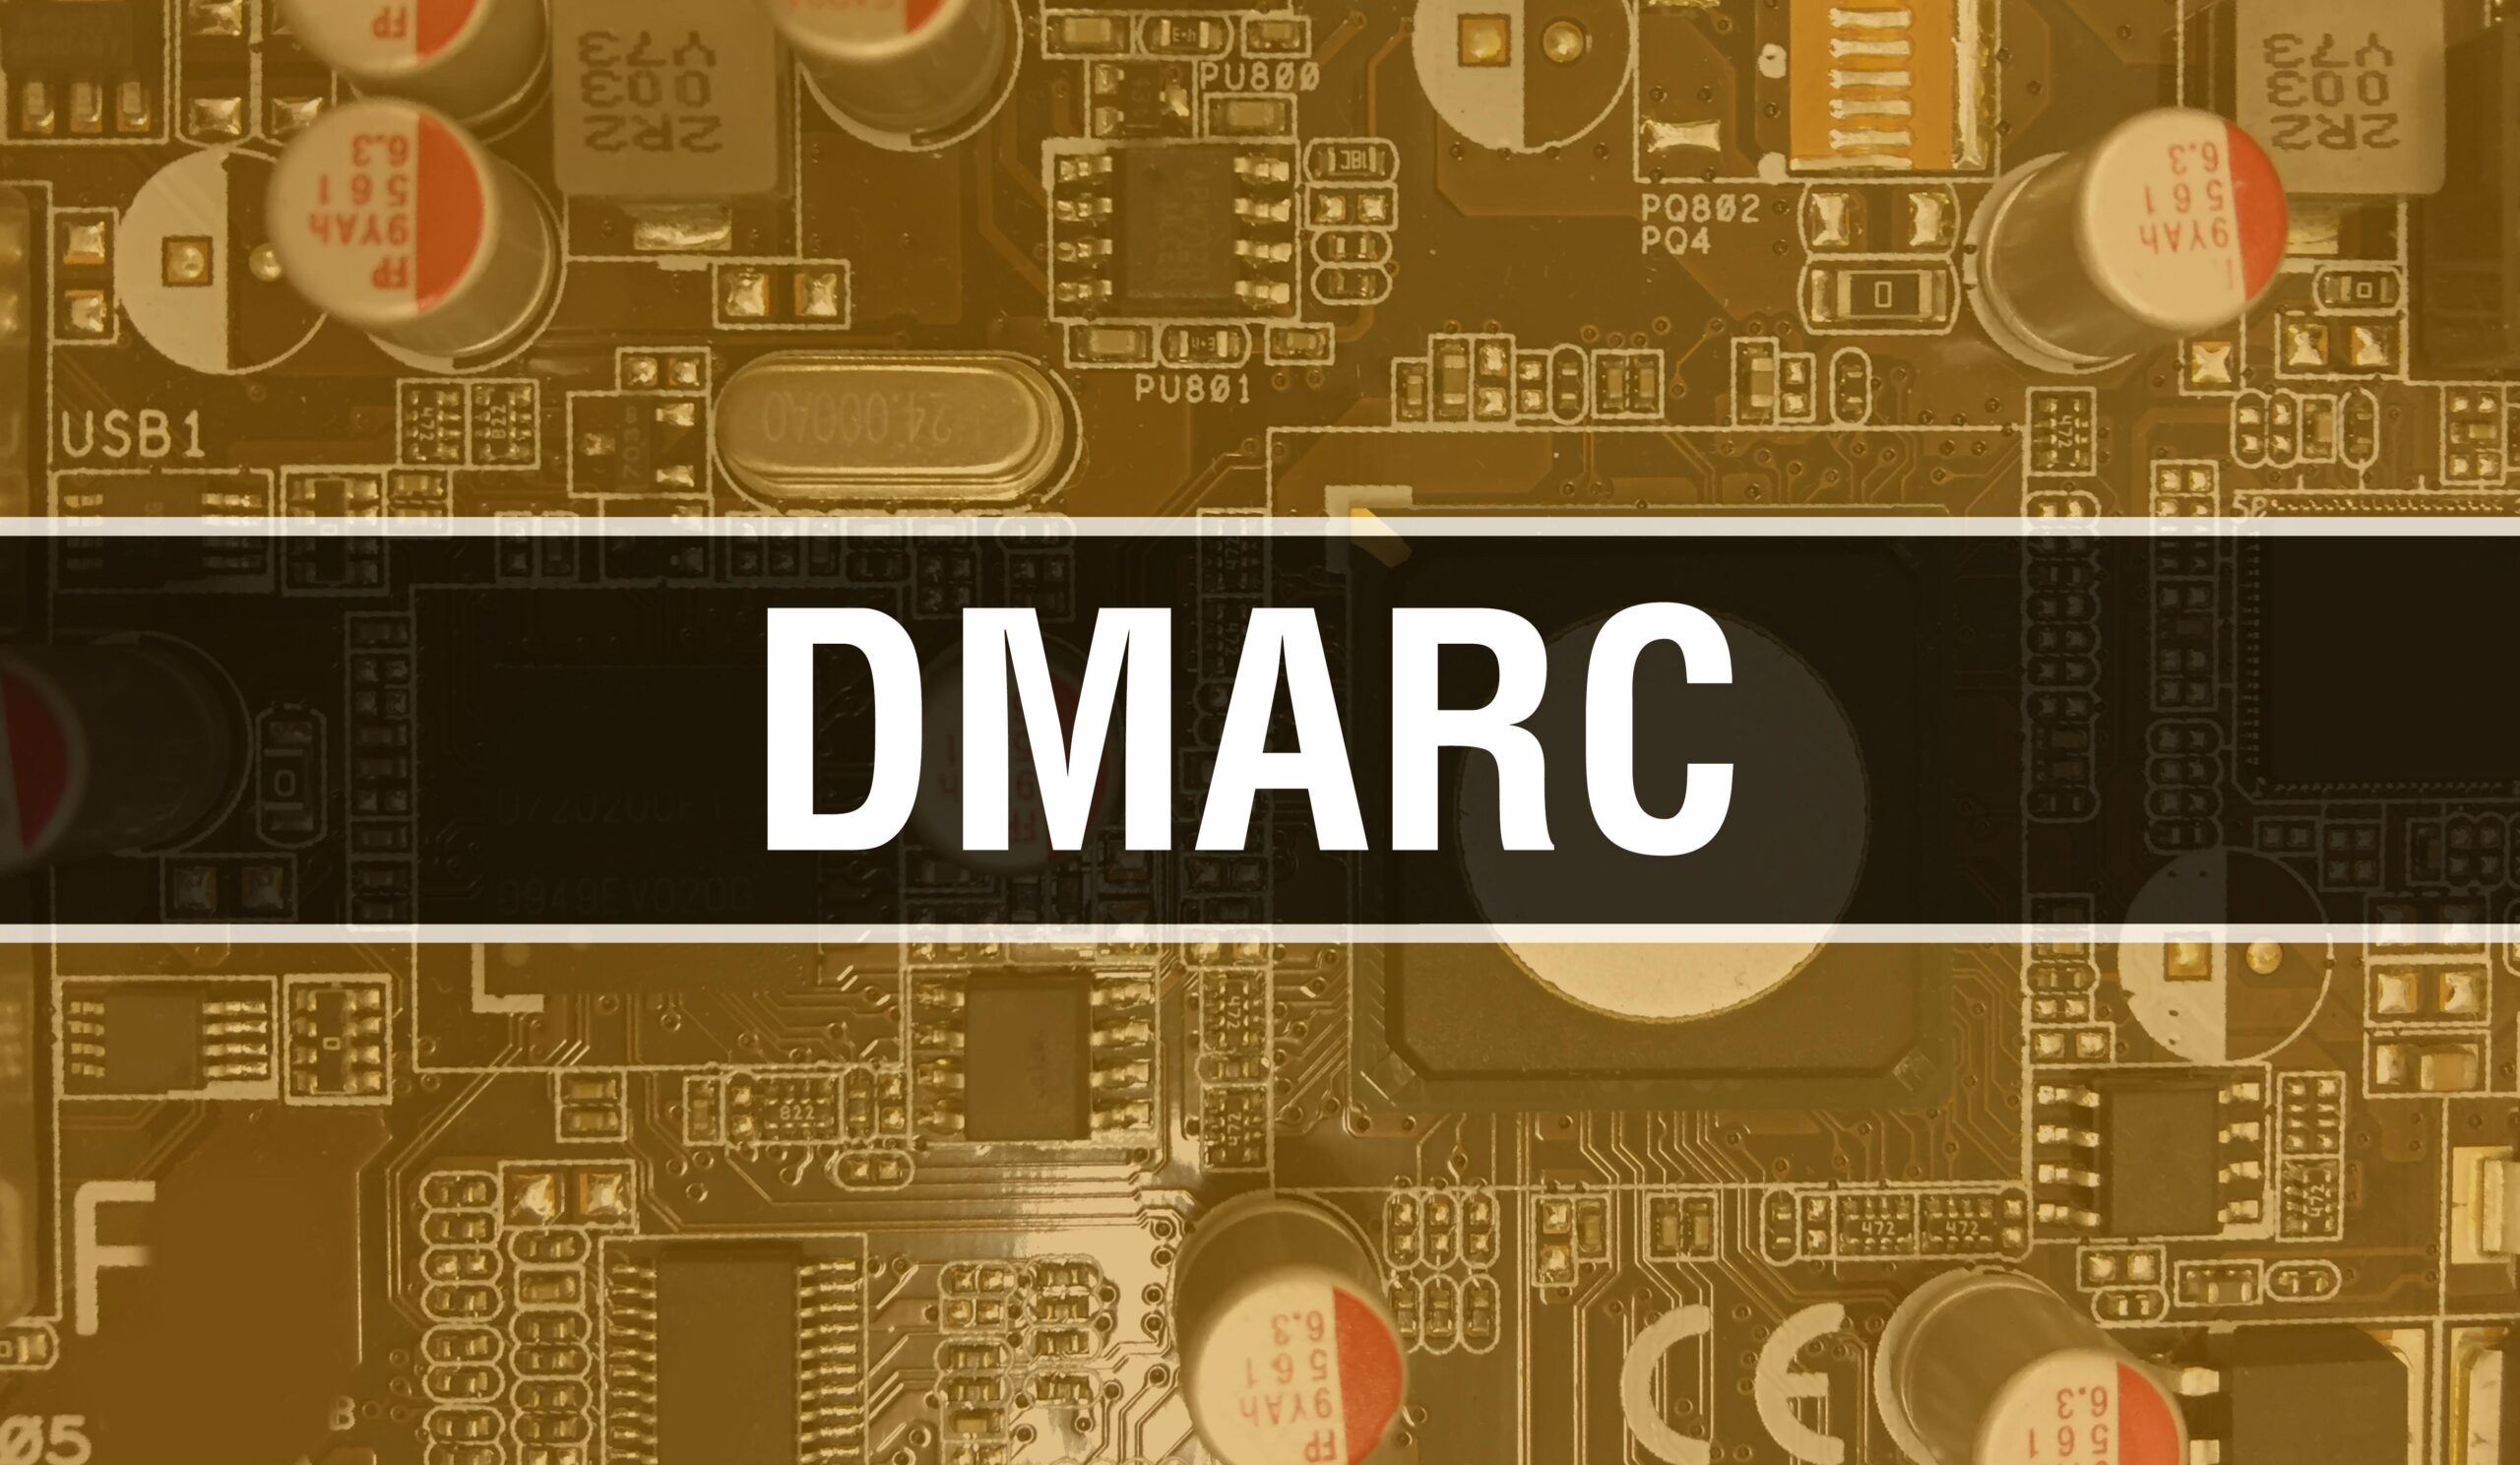 UAE and South African Hospitals Fail on DMARC Implementation – Source: www.darkreading.com